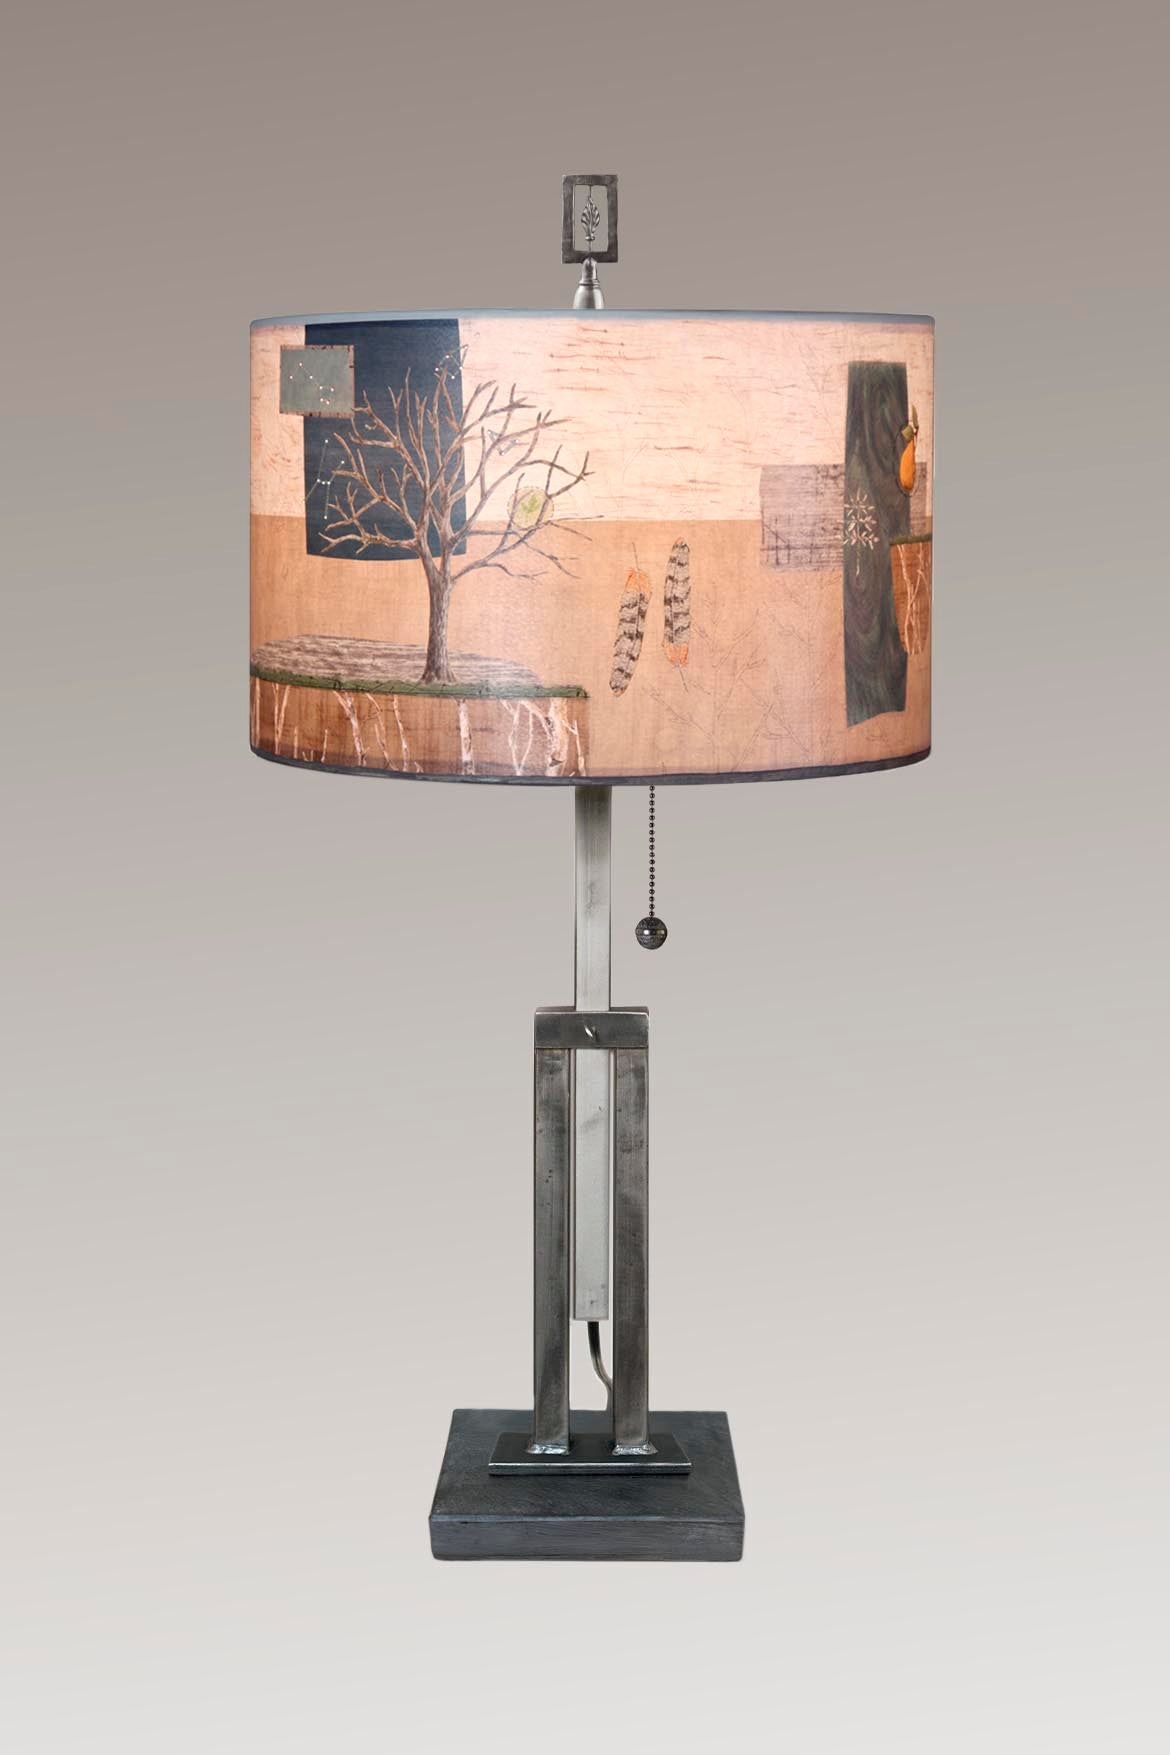 Janna Ugone &amp; Co Table Lamp Adjustable-Height Steel Table Lamp with Large Drum Shade in Wander in Drift